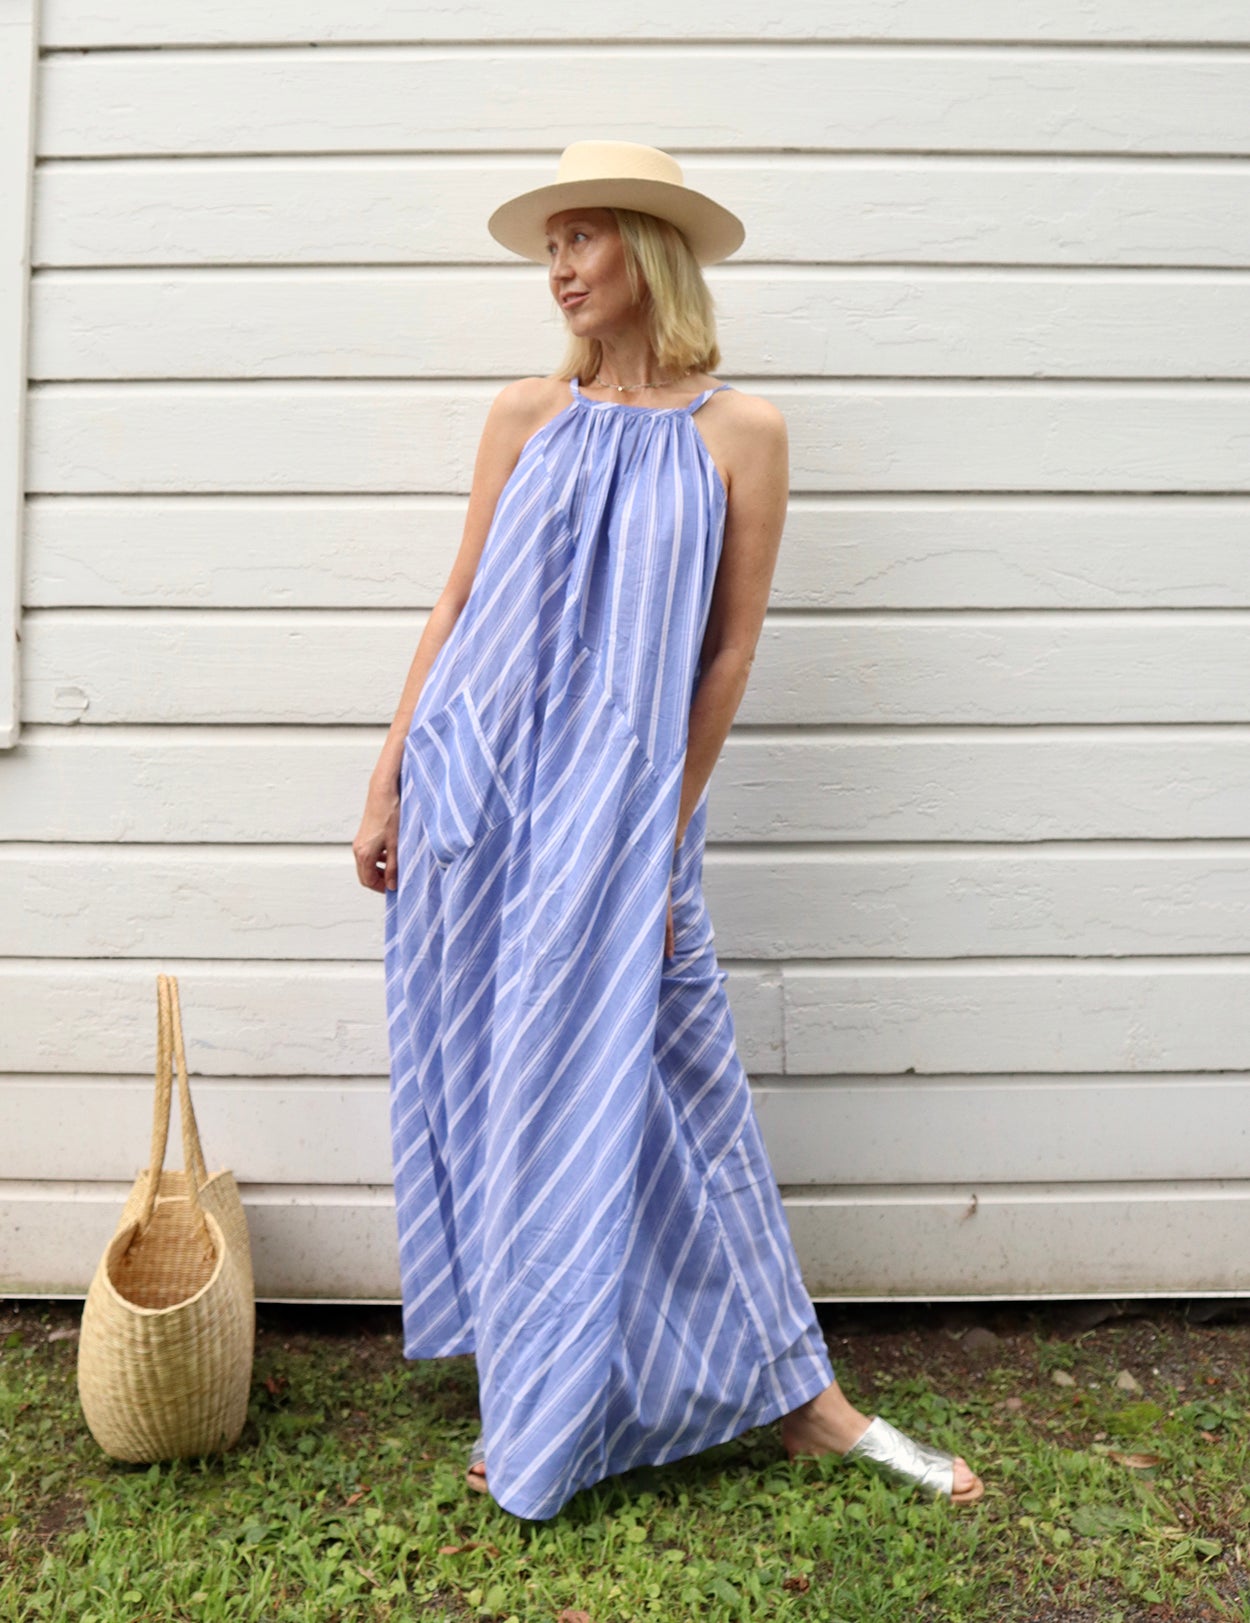 Janet MacGillivray in the M.PATMOS Laia Dress